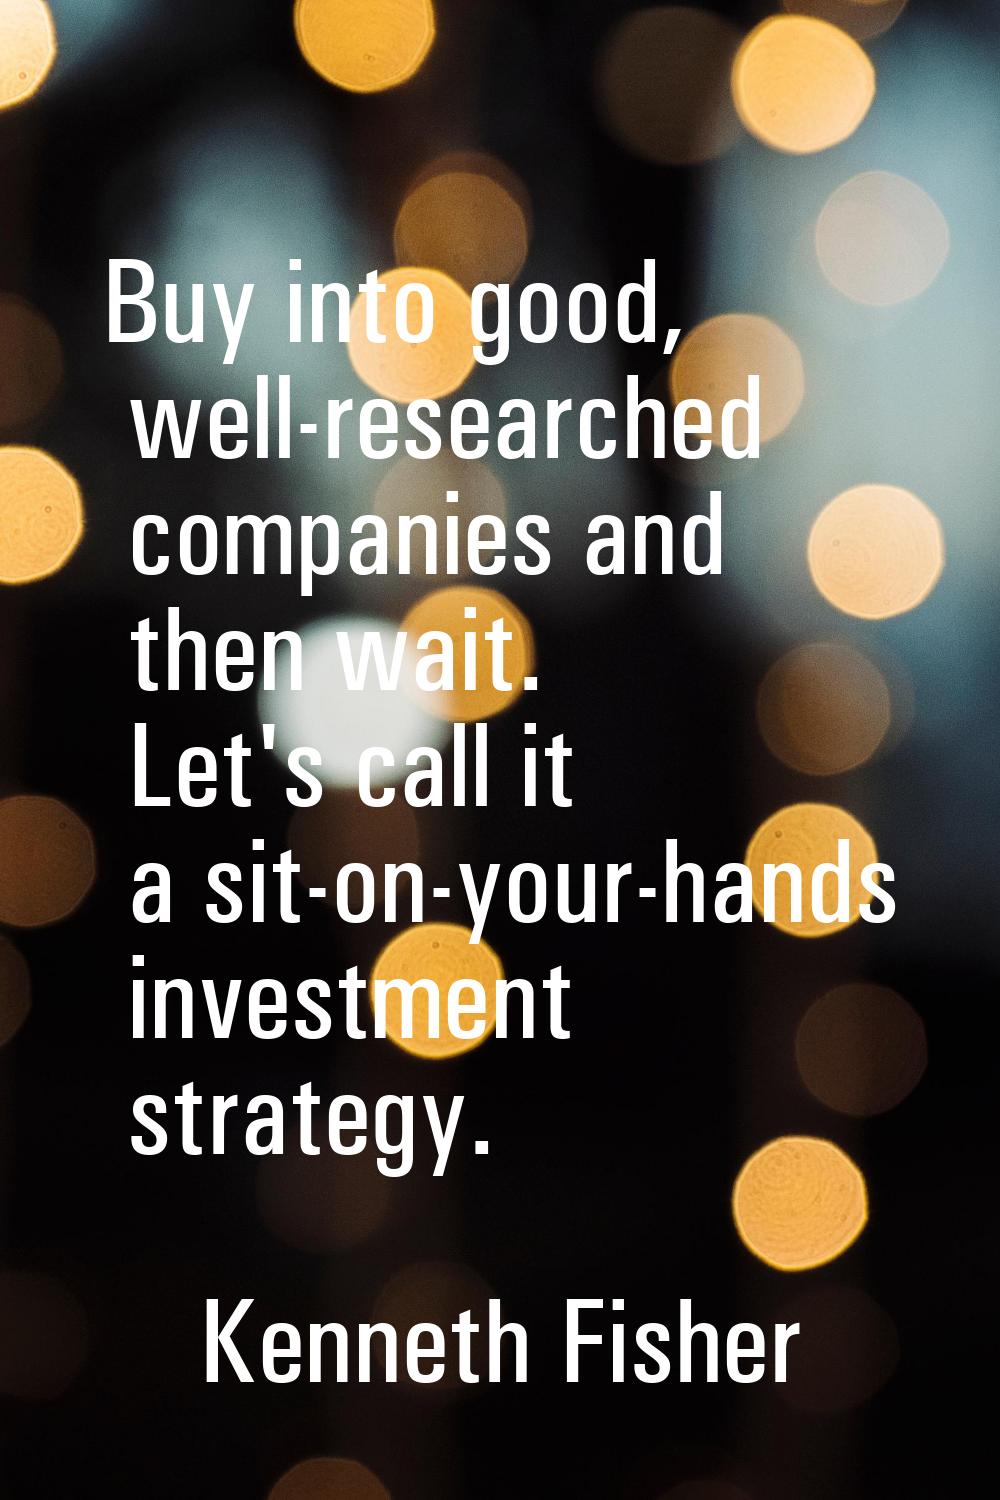 Buy into good, well-researched companies and then wait. Let's call it a sit-on-your-hands investmen